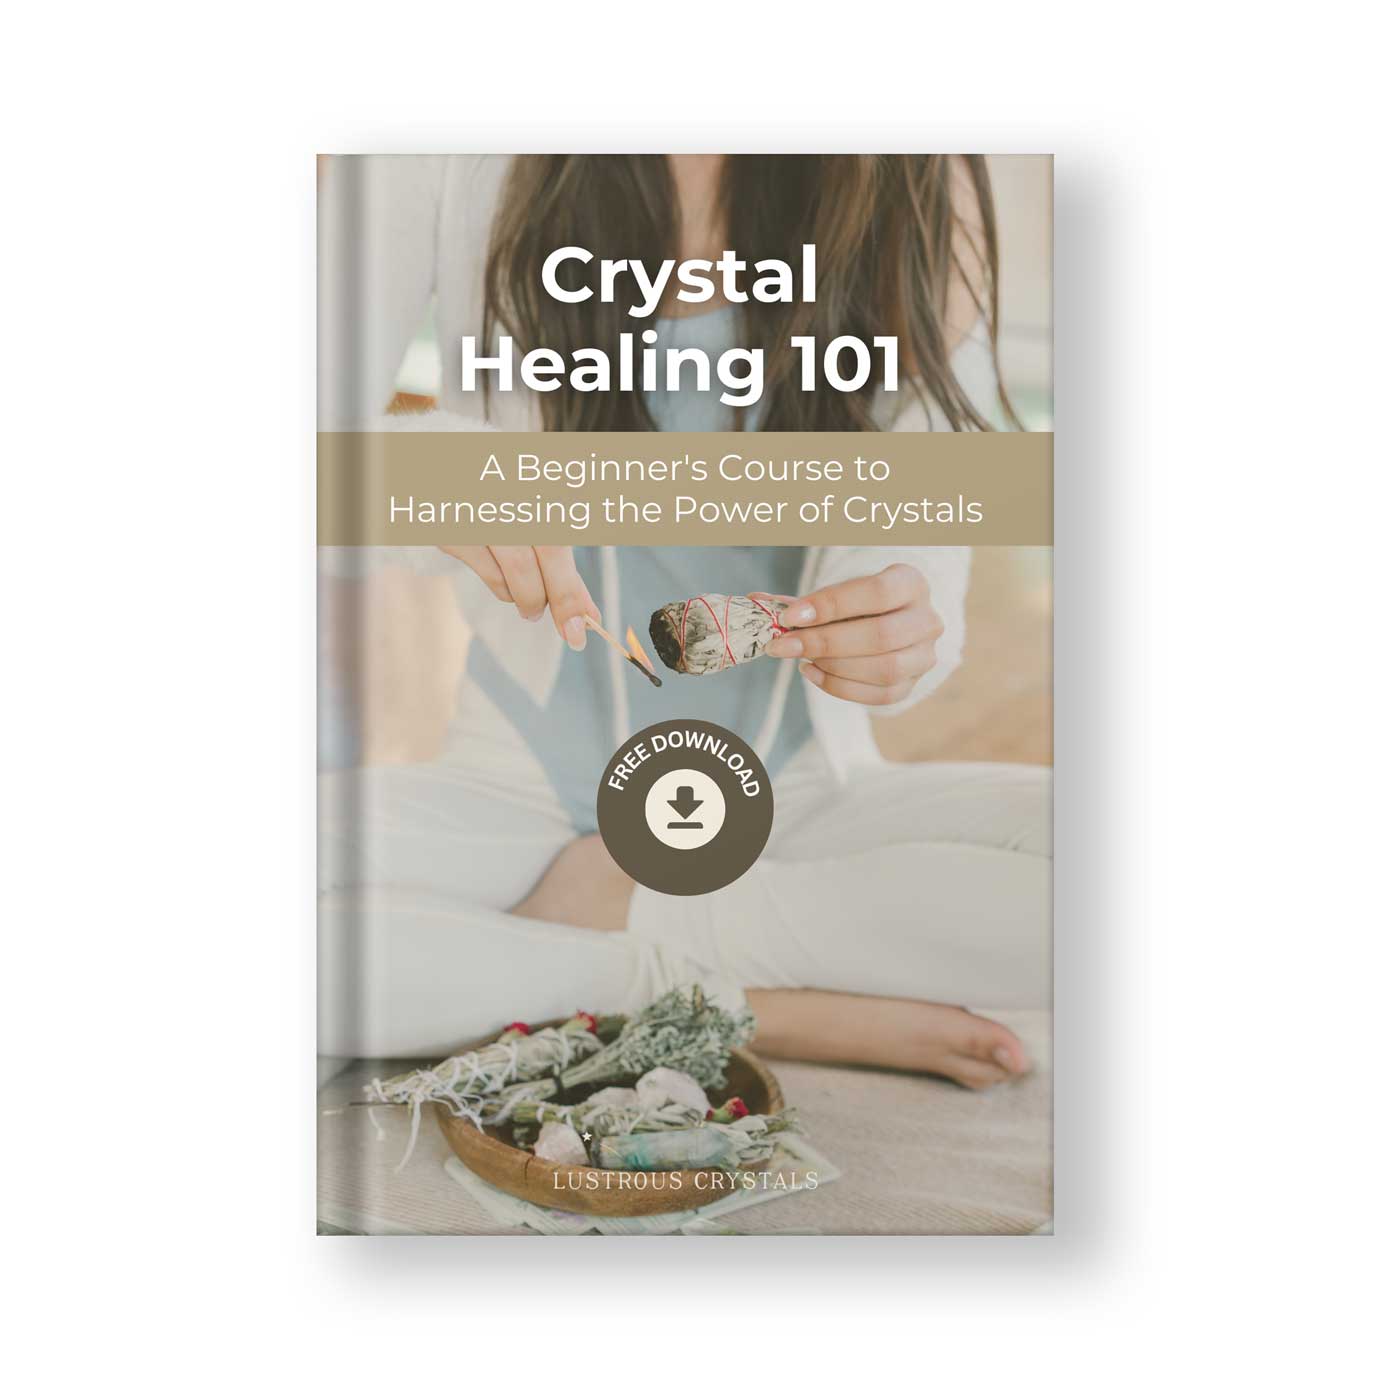 Crystal Healing 101: A Beginner's Course to Harnessing the Power of Crystals